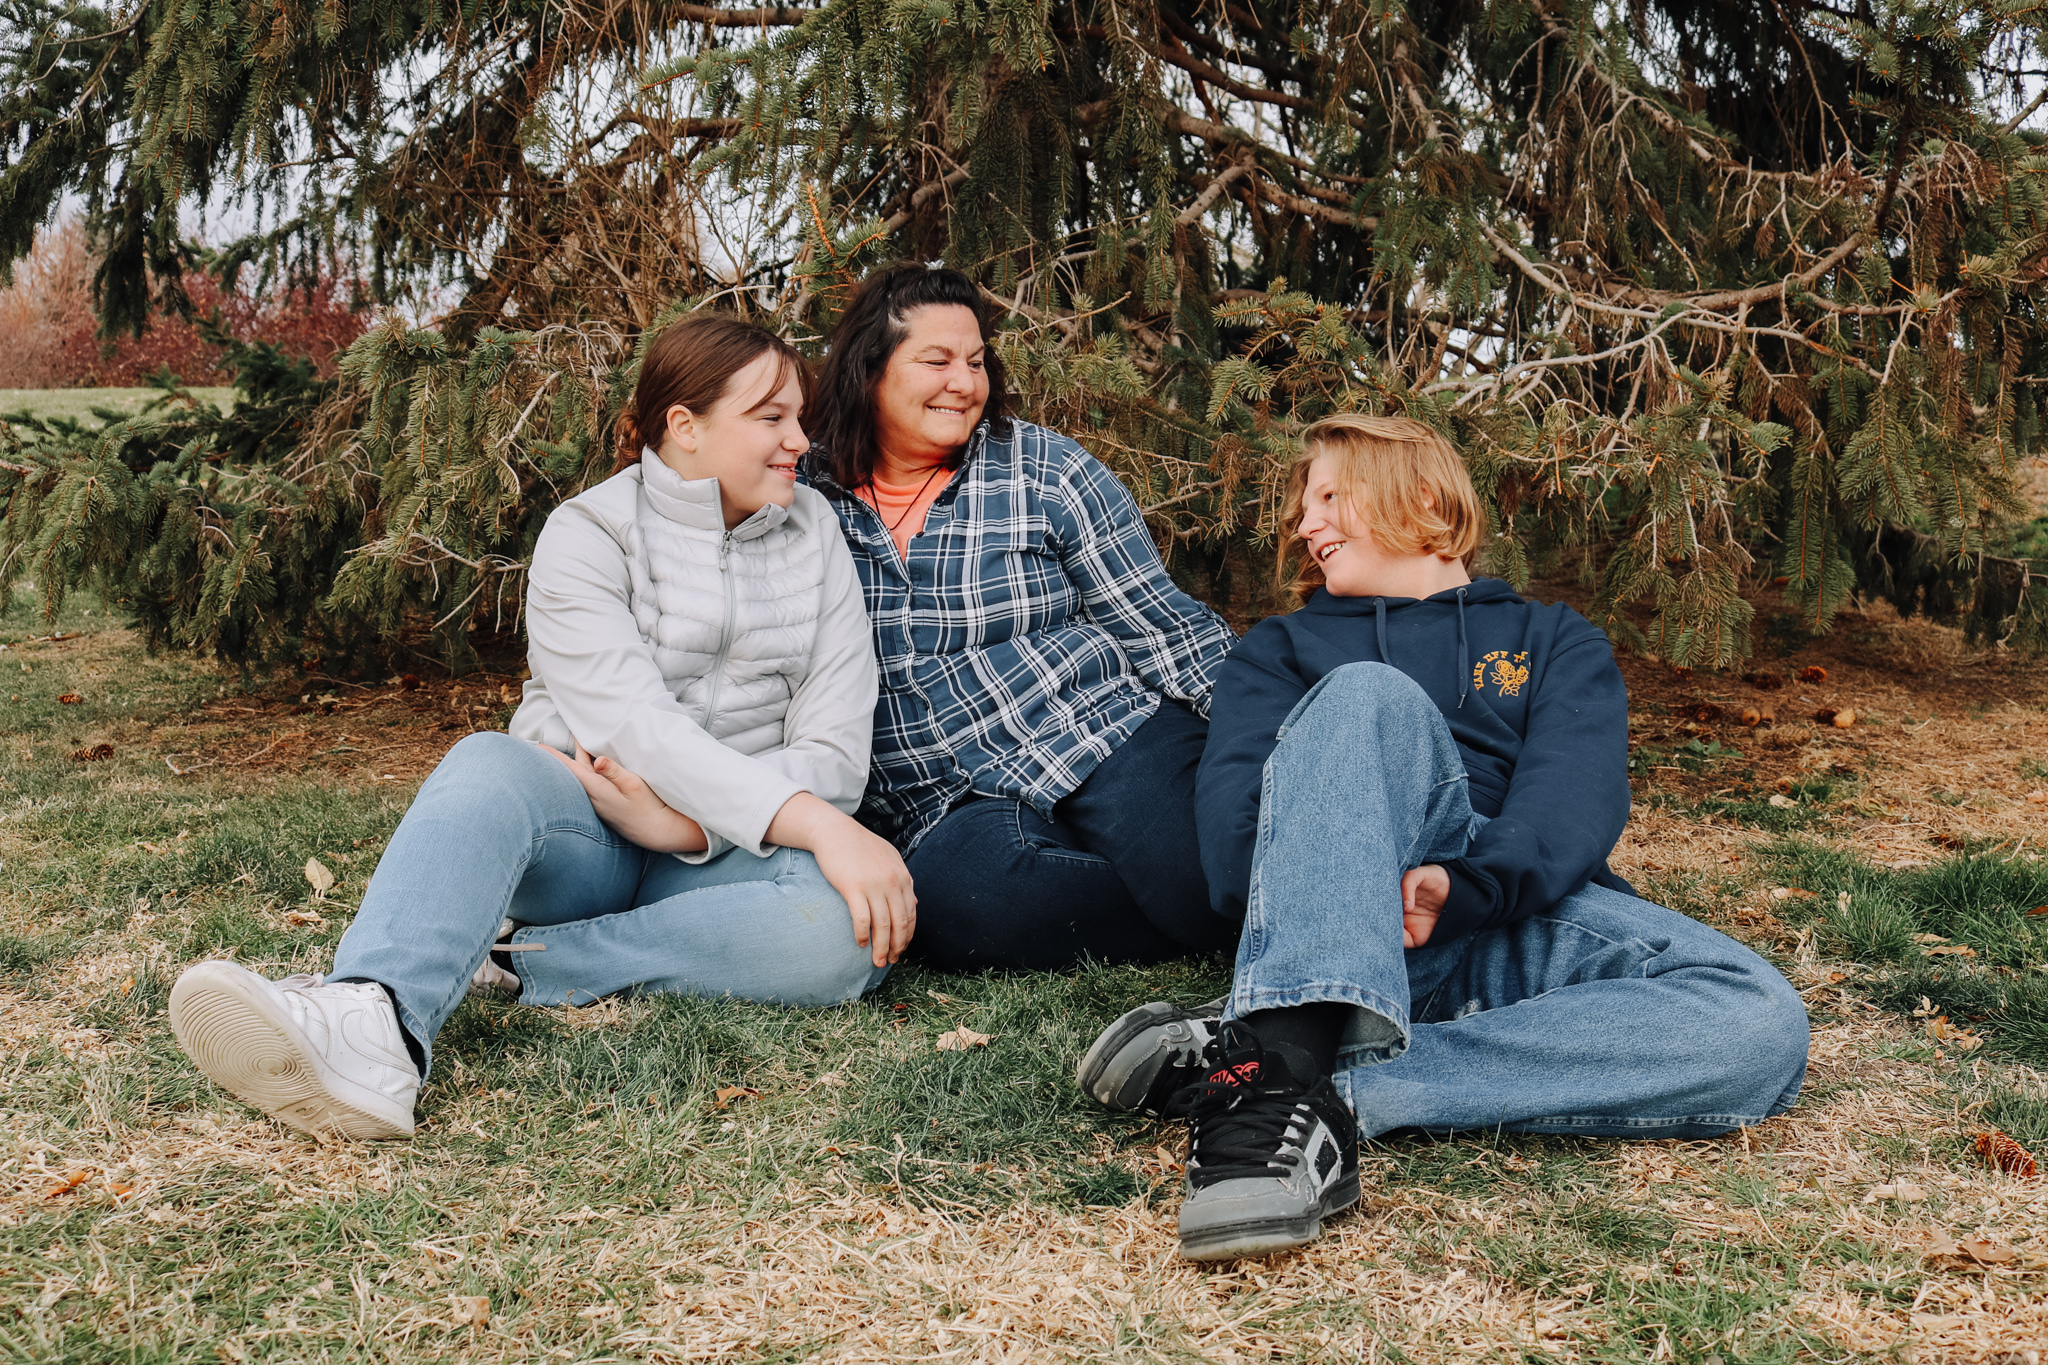 Family of three sitting on grass, looking happily at each other